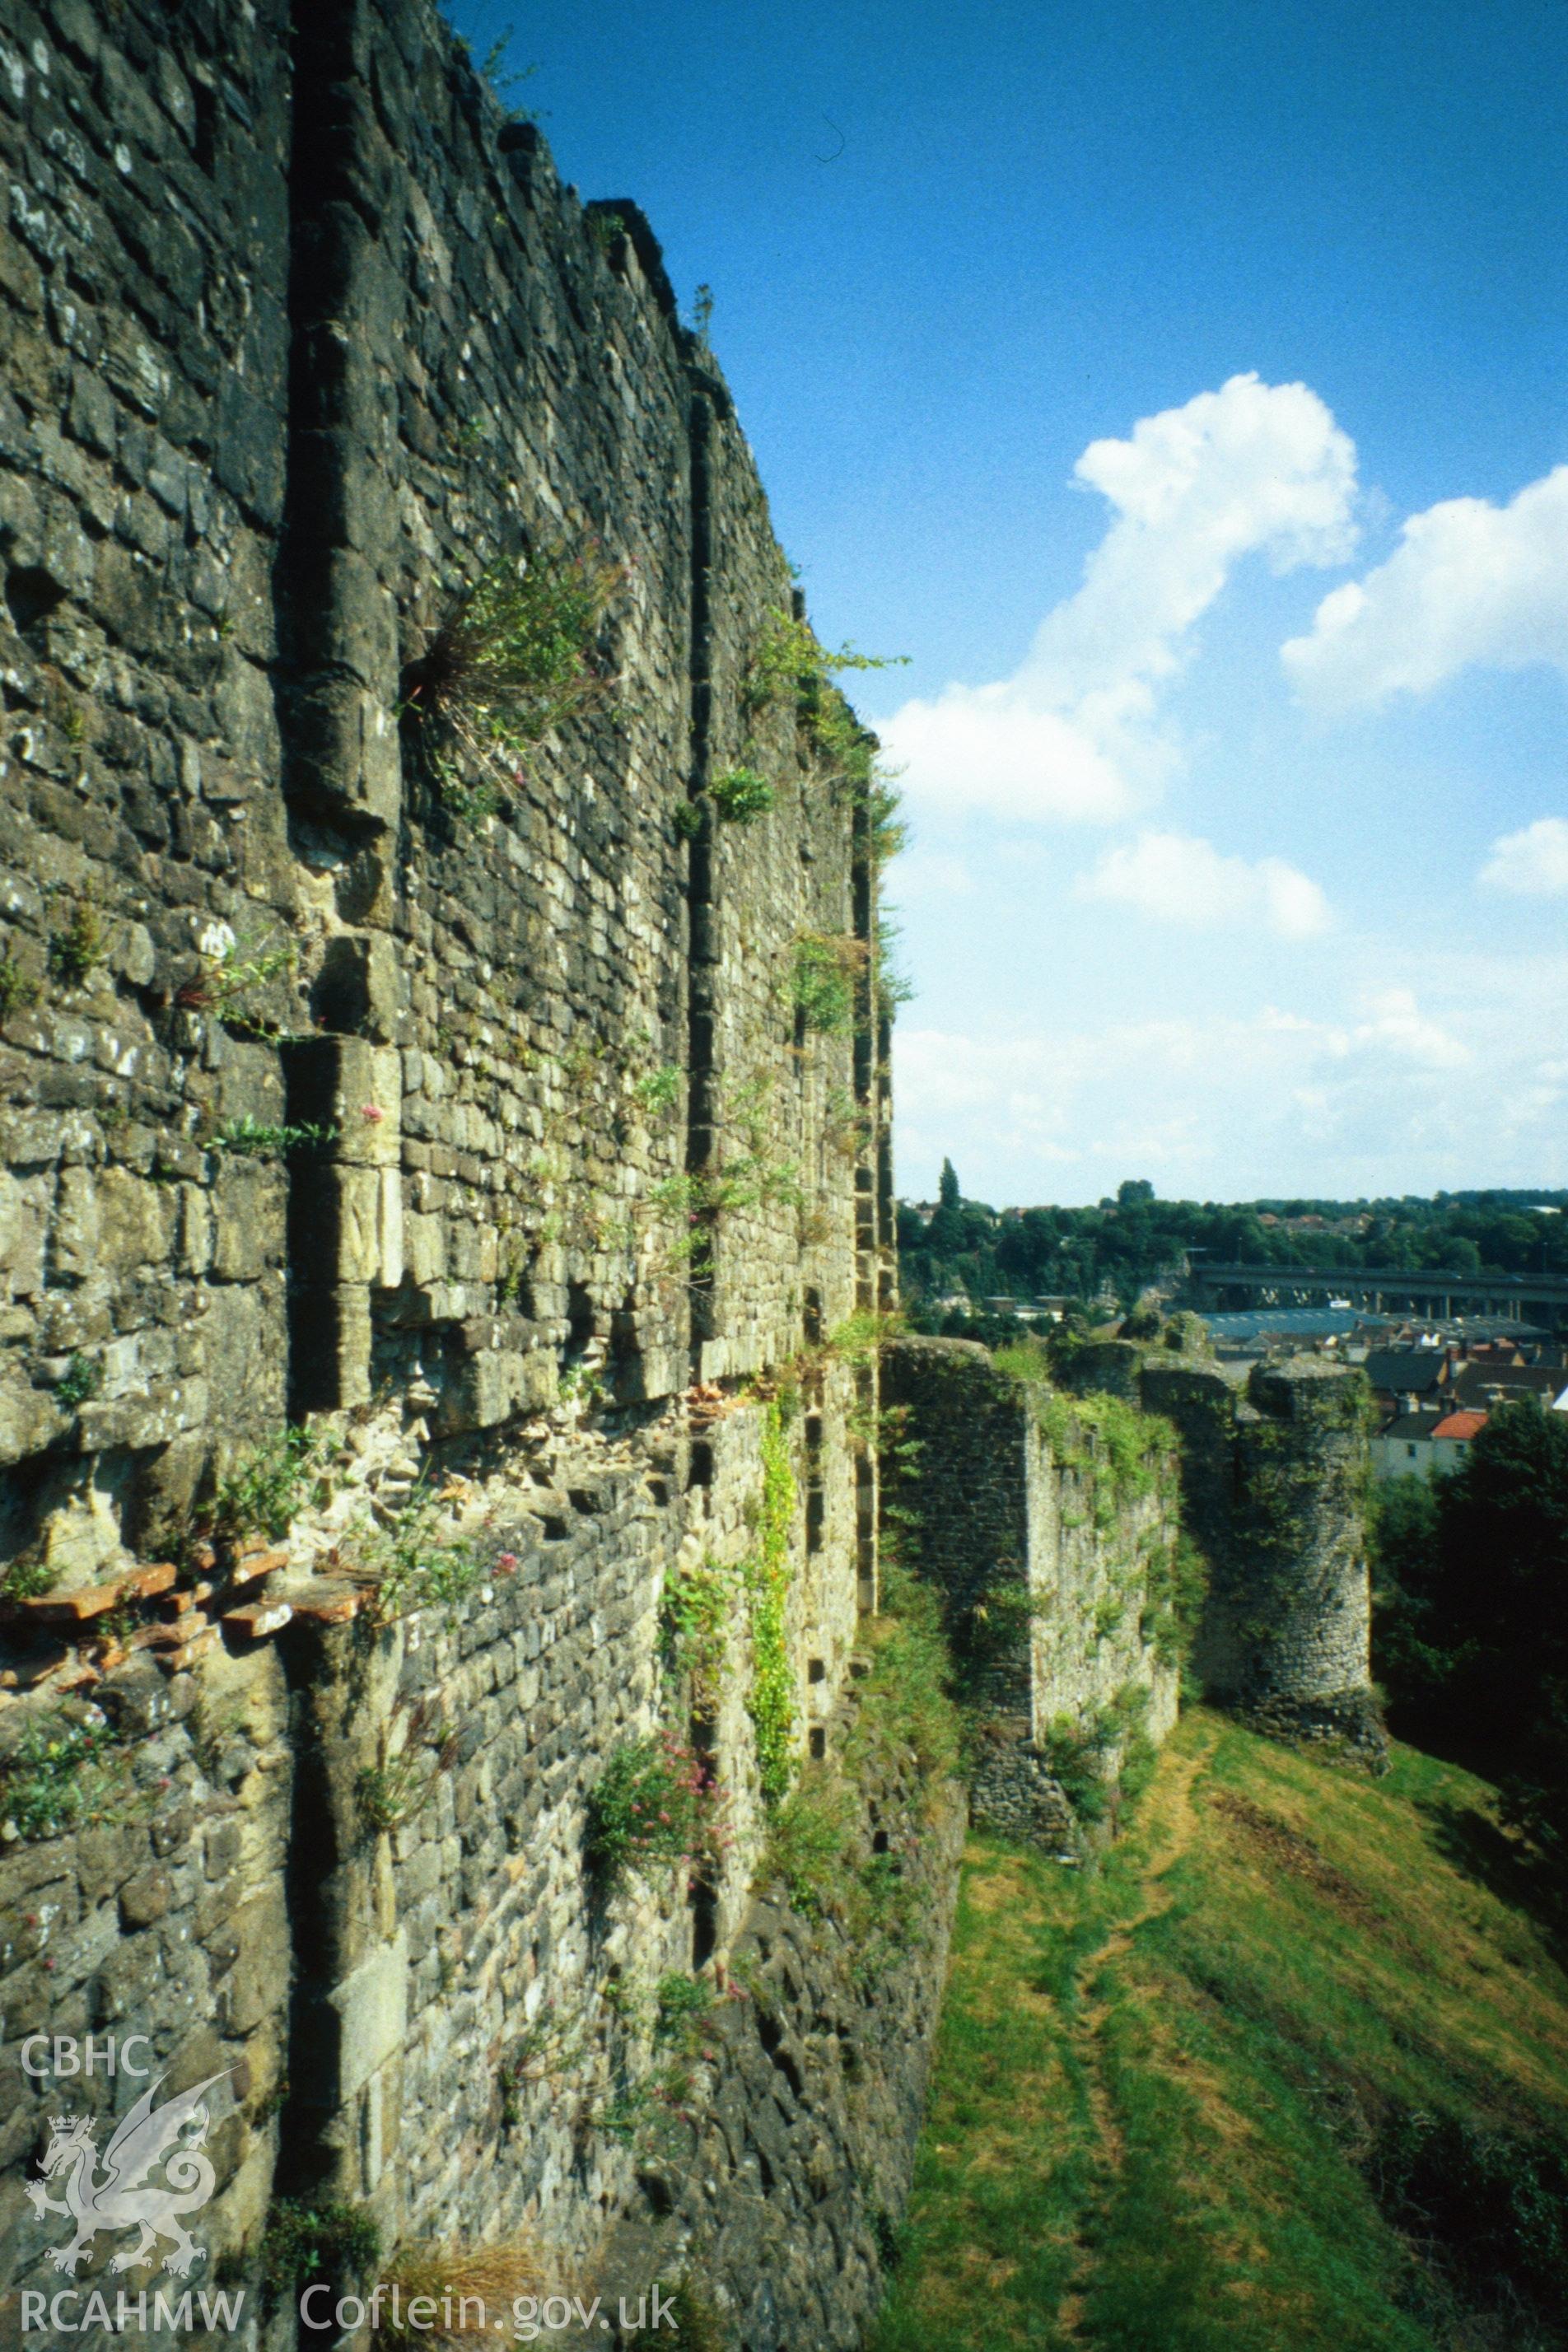 West face of the castle looking south from Great Tower to town.